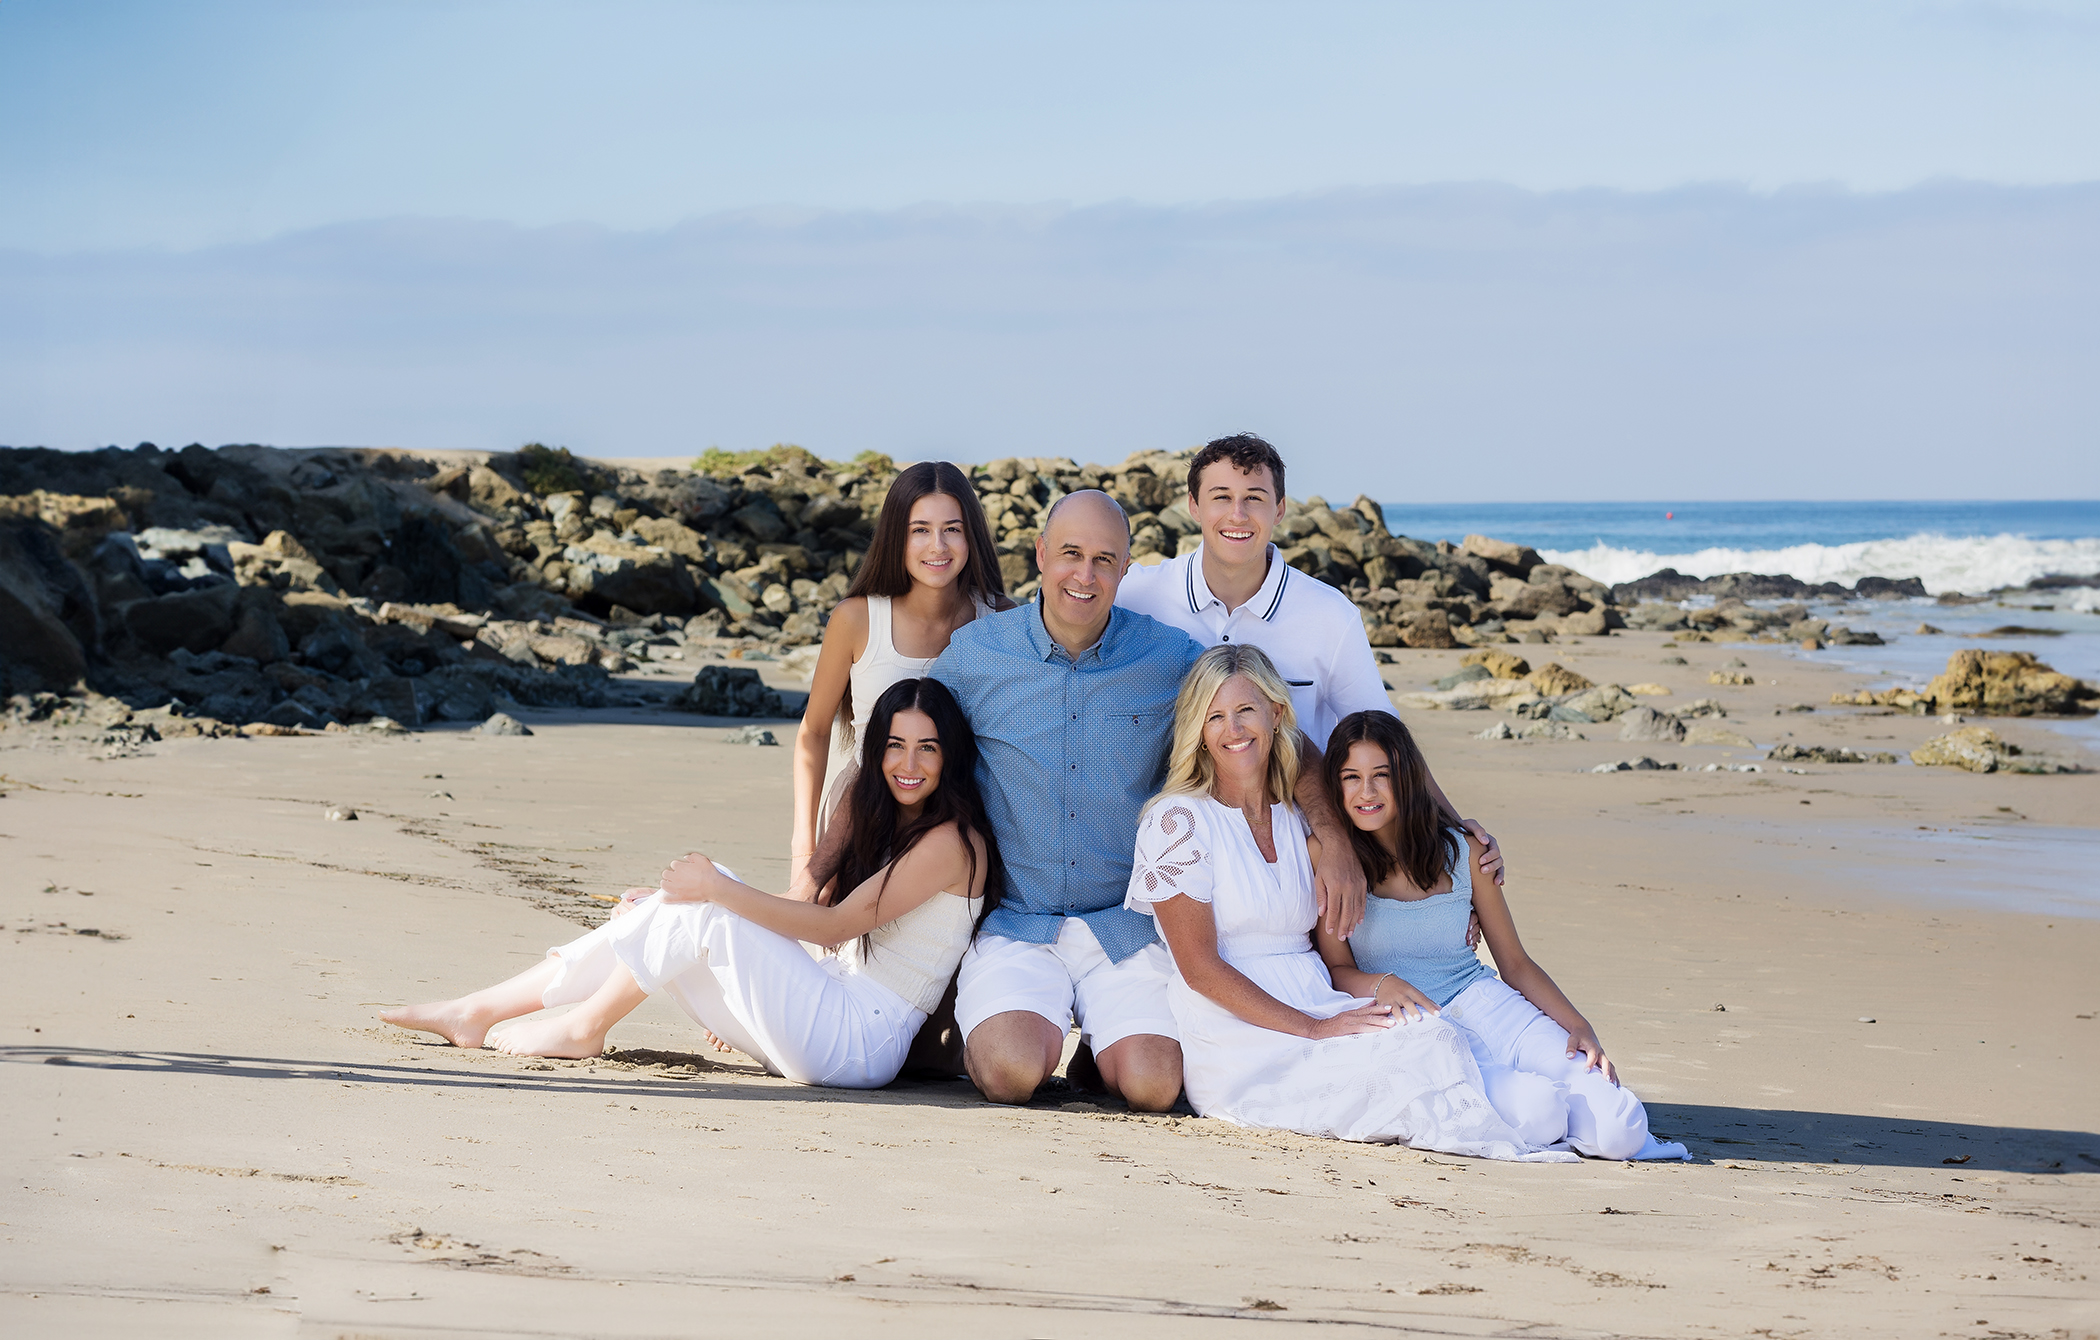 Strands in Dana point is the perfect spot for your summer family photos on the beach.